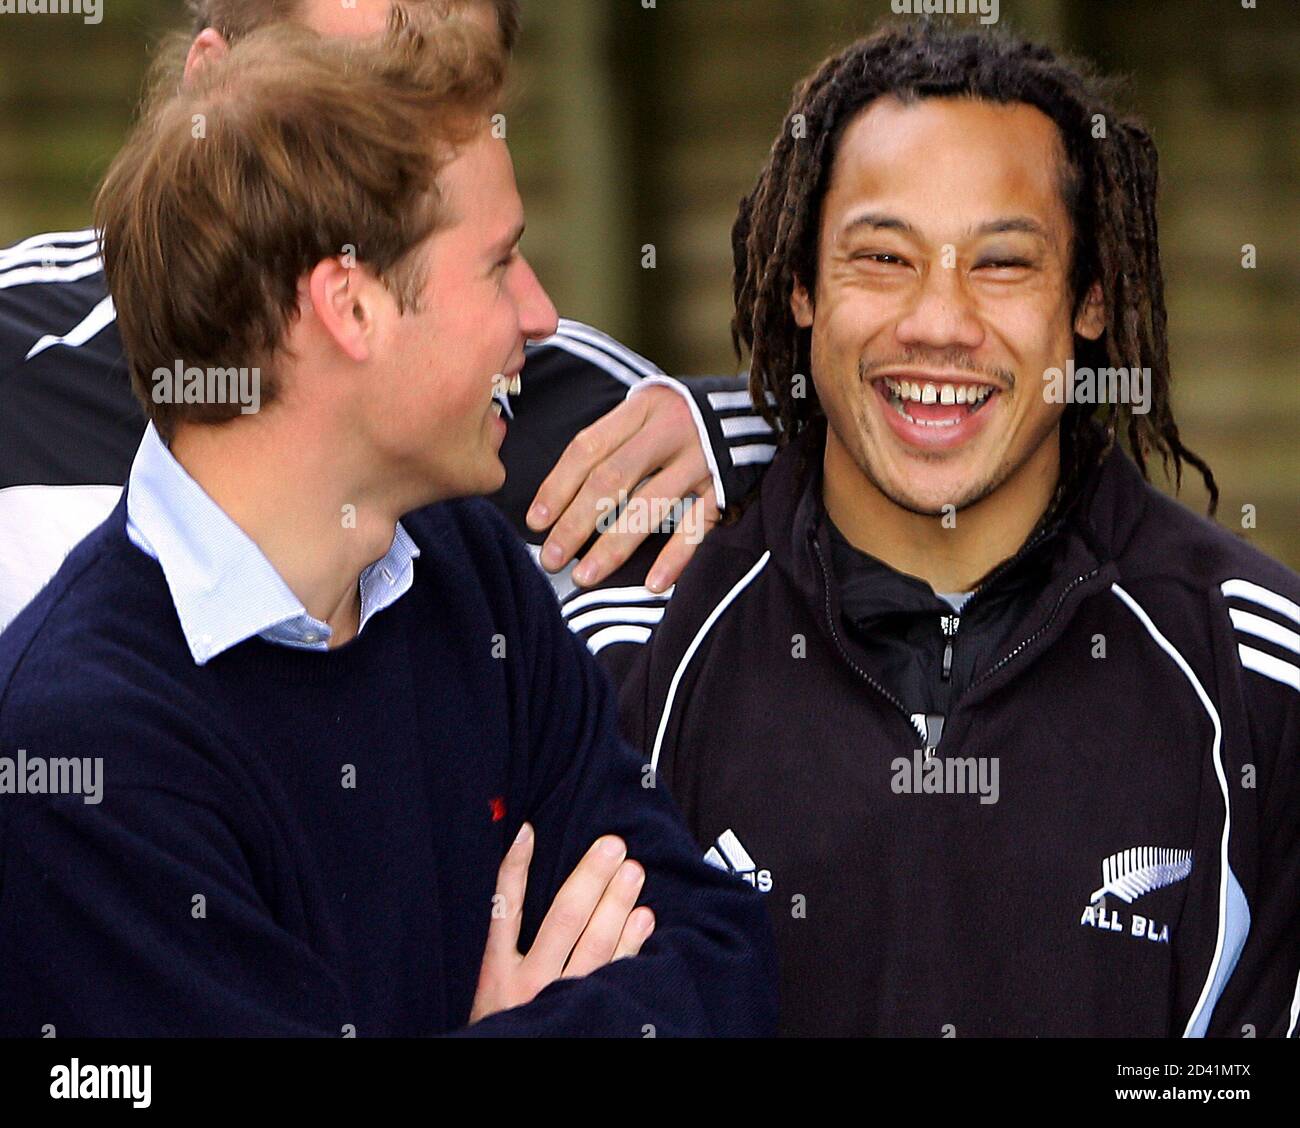 Britain's Prince William laughs with captain of the All Blacks Tana Umaga at a public training session in Auckland.  Britain's Prince William (L) laughs with the captain of the All Blacks Tana Umaga at a public training session in Auckland July 4, 2005. Prince William, who graduated recently from Scotland's St Andrews University, met the All Black team two days after they defeated the British and Irish Lions in Wellington and took an unbeatable 2-0 lead in the best-of-three test series. Prince William is also performing official duties during his ten-day tour of New Zealand, his first official Foto de stock